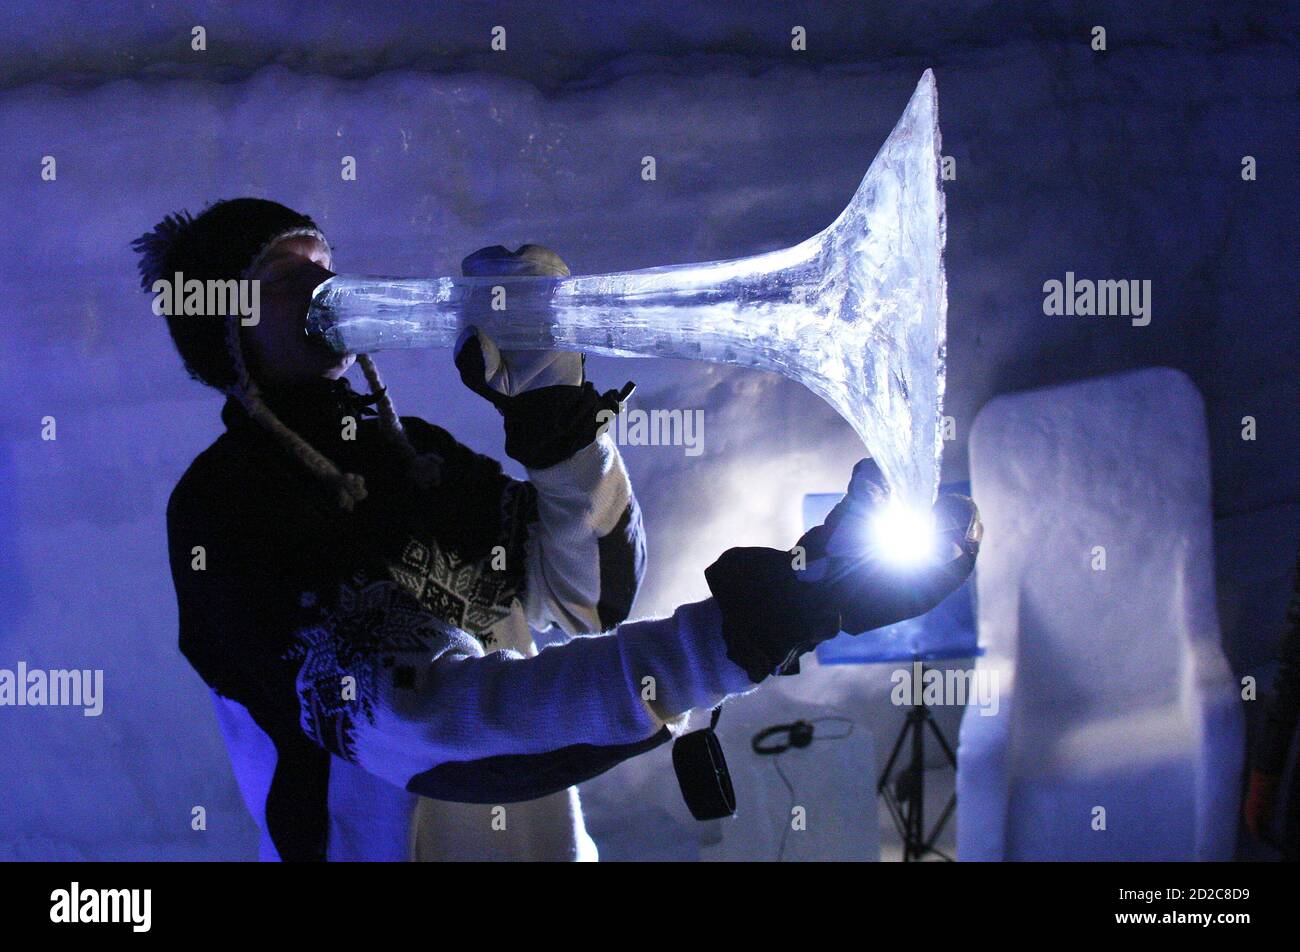 Norwegian musician Terje Isungset plays an ice instrument during a concert  at the Ice Music Festival, in the valley of Val Senales in northern Italy,  February 23, 2008. The festival takes place